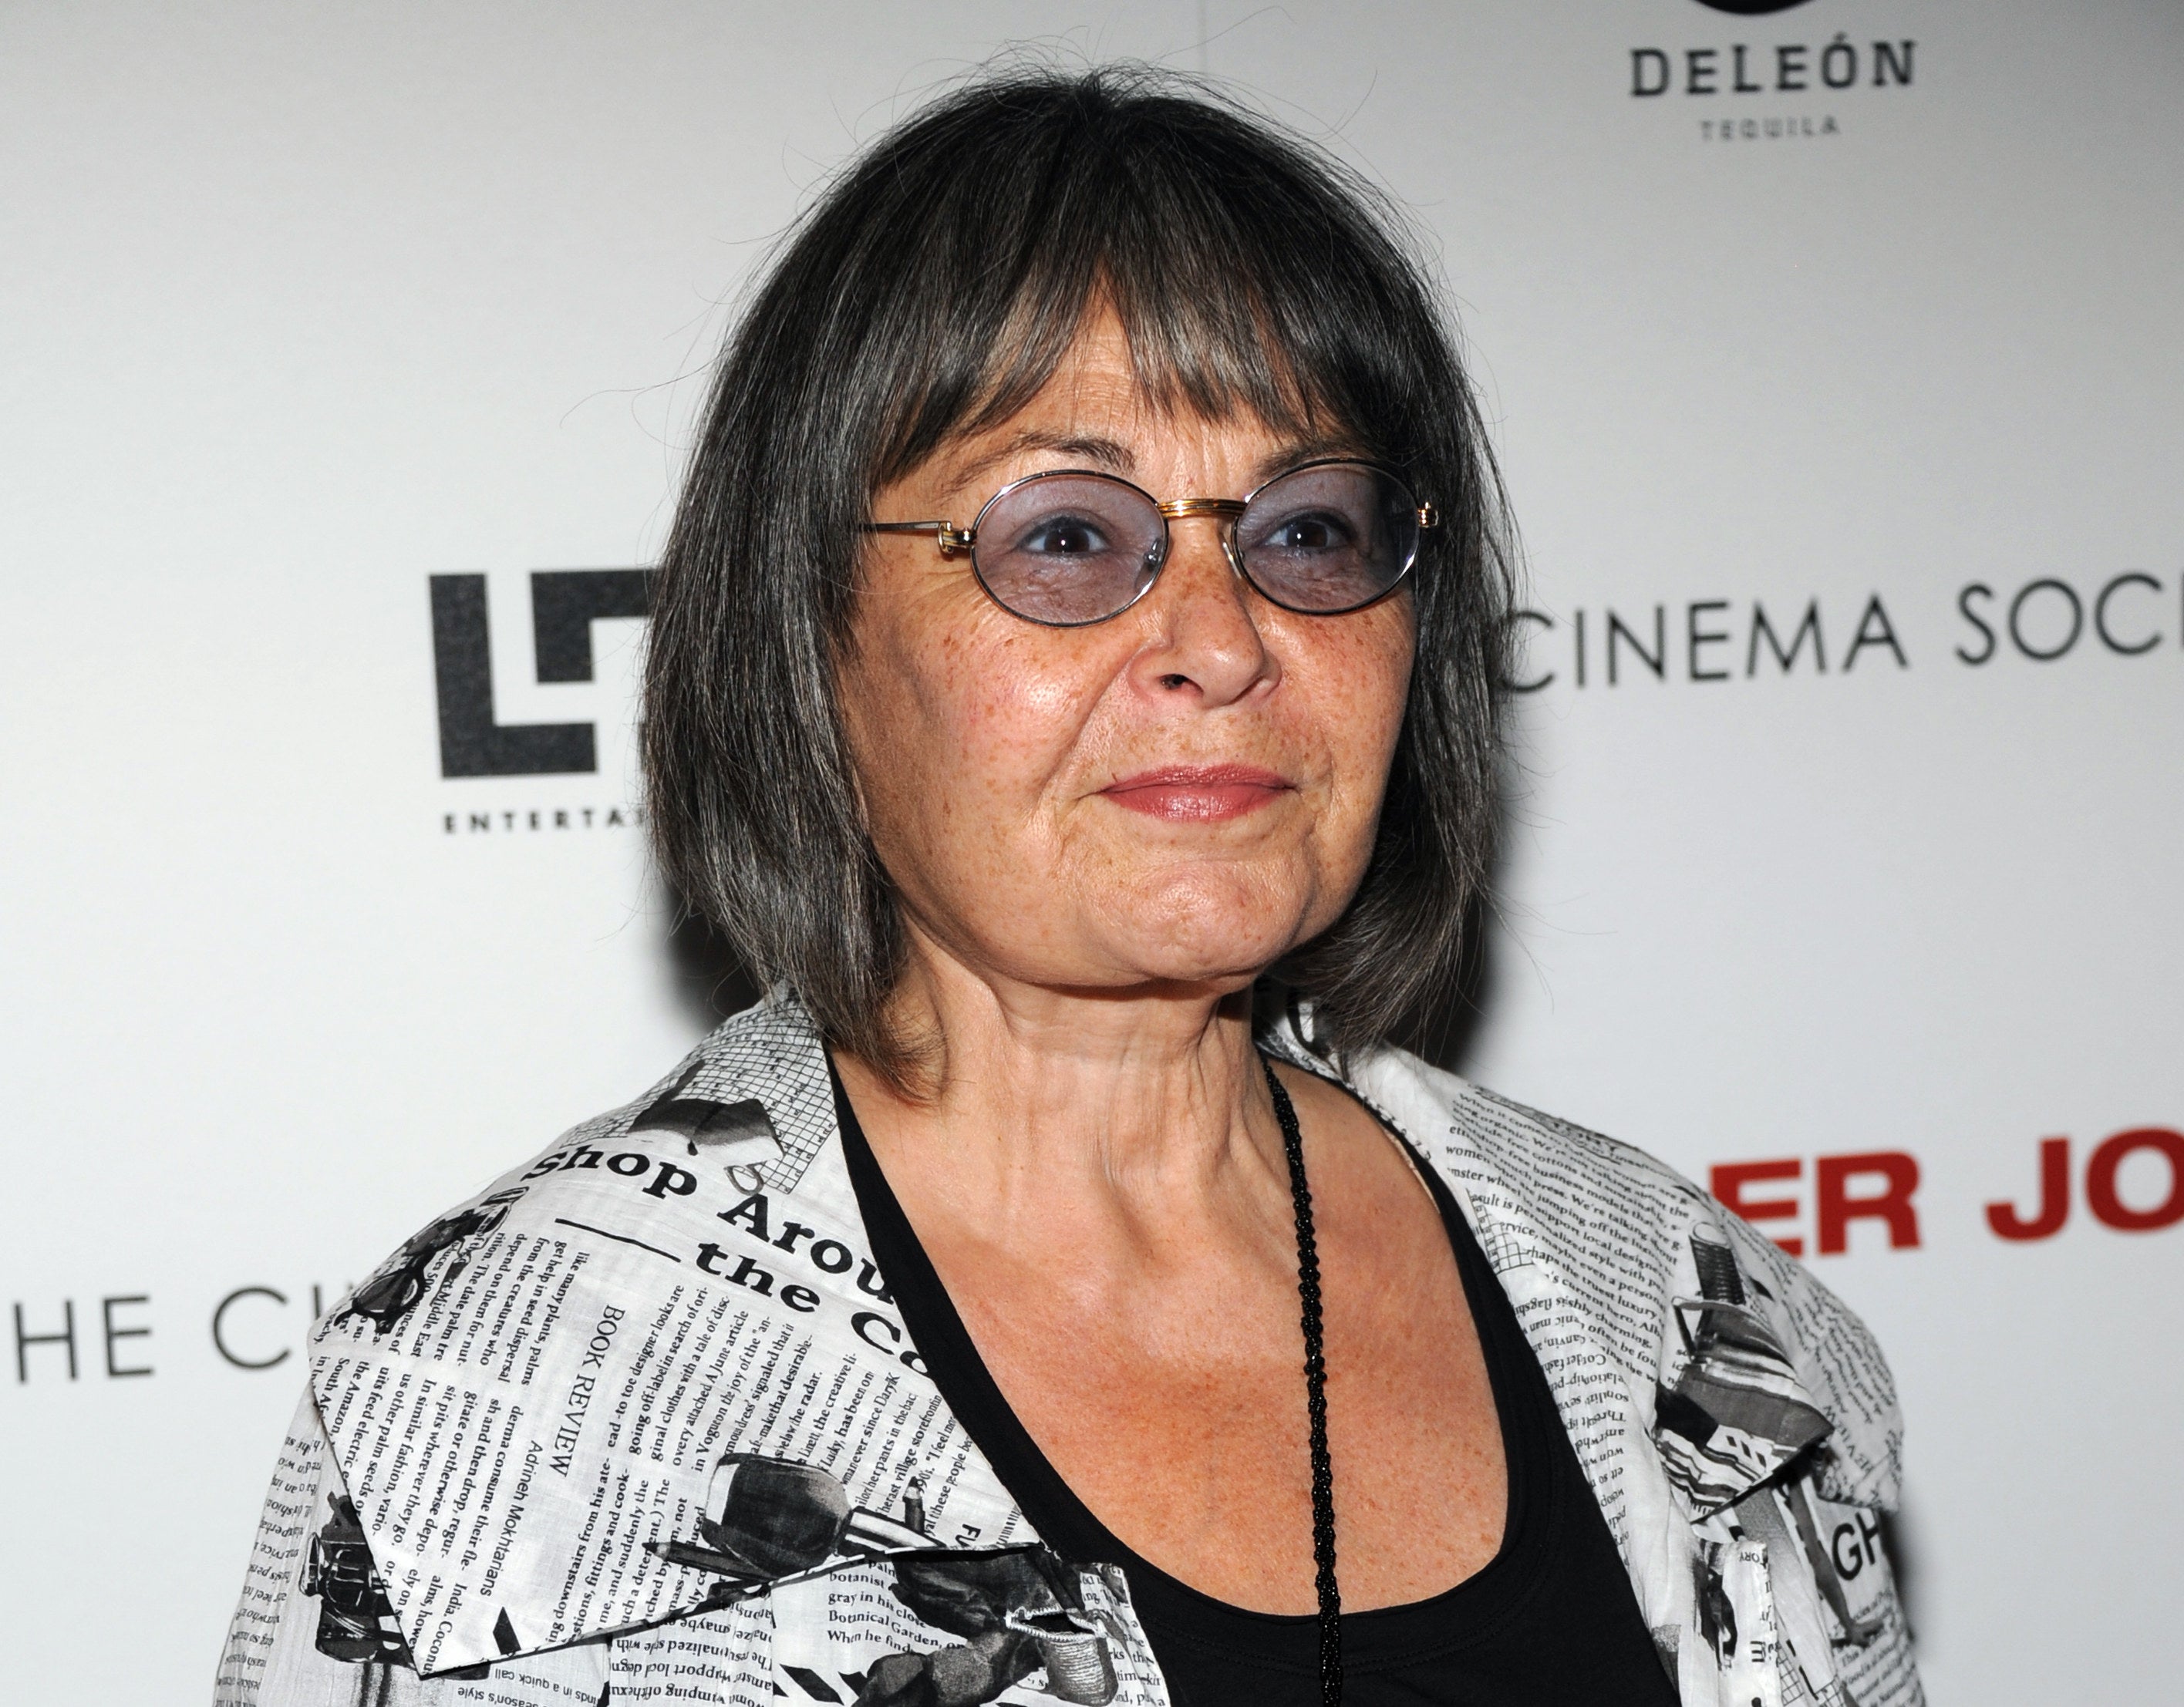 Roseanne Barr at an event in 2010